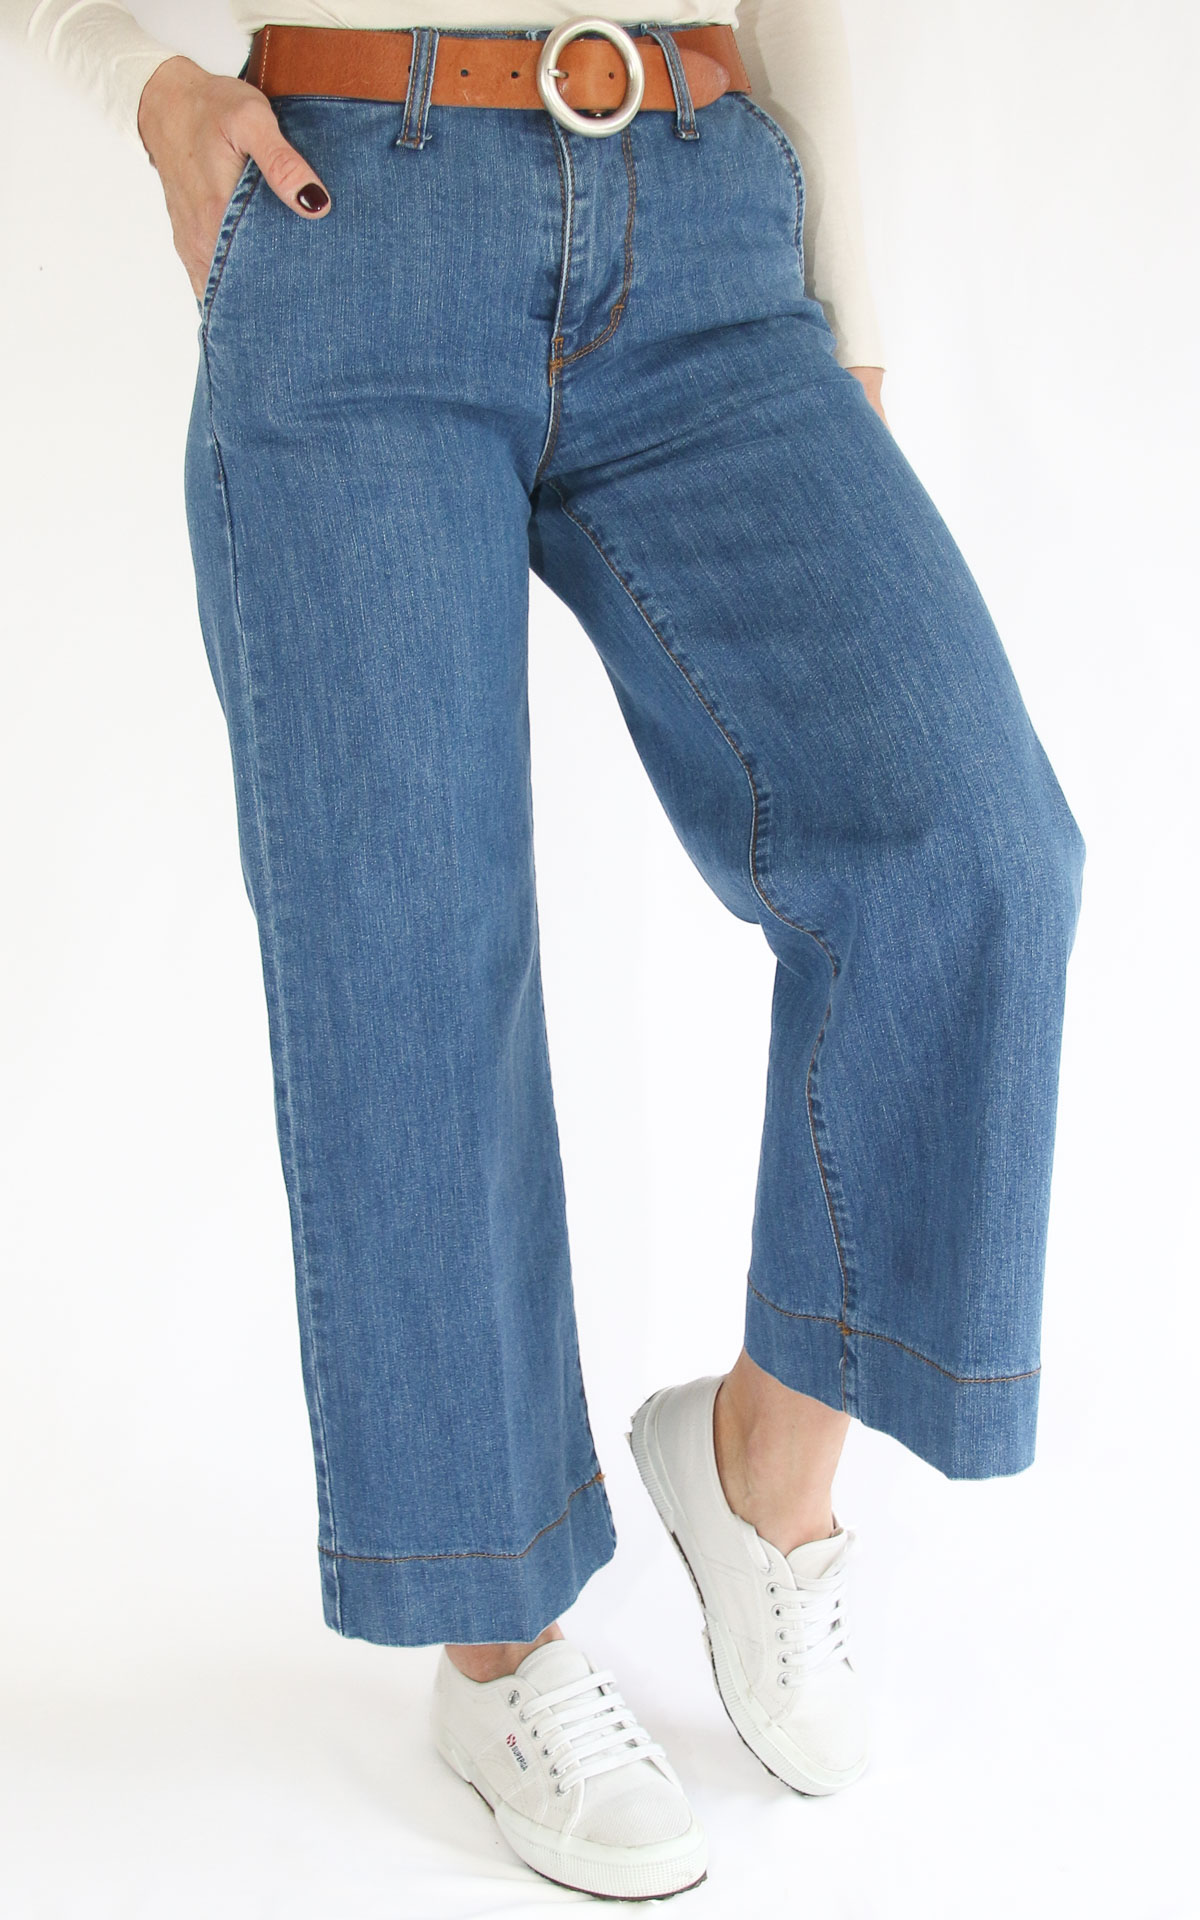 Initial - Jeans cropped - Lilly